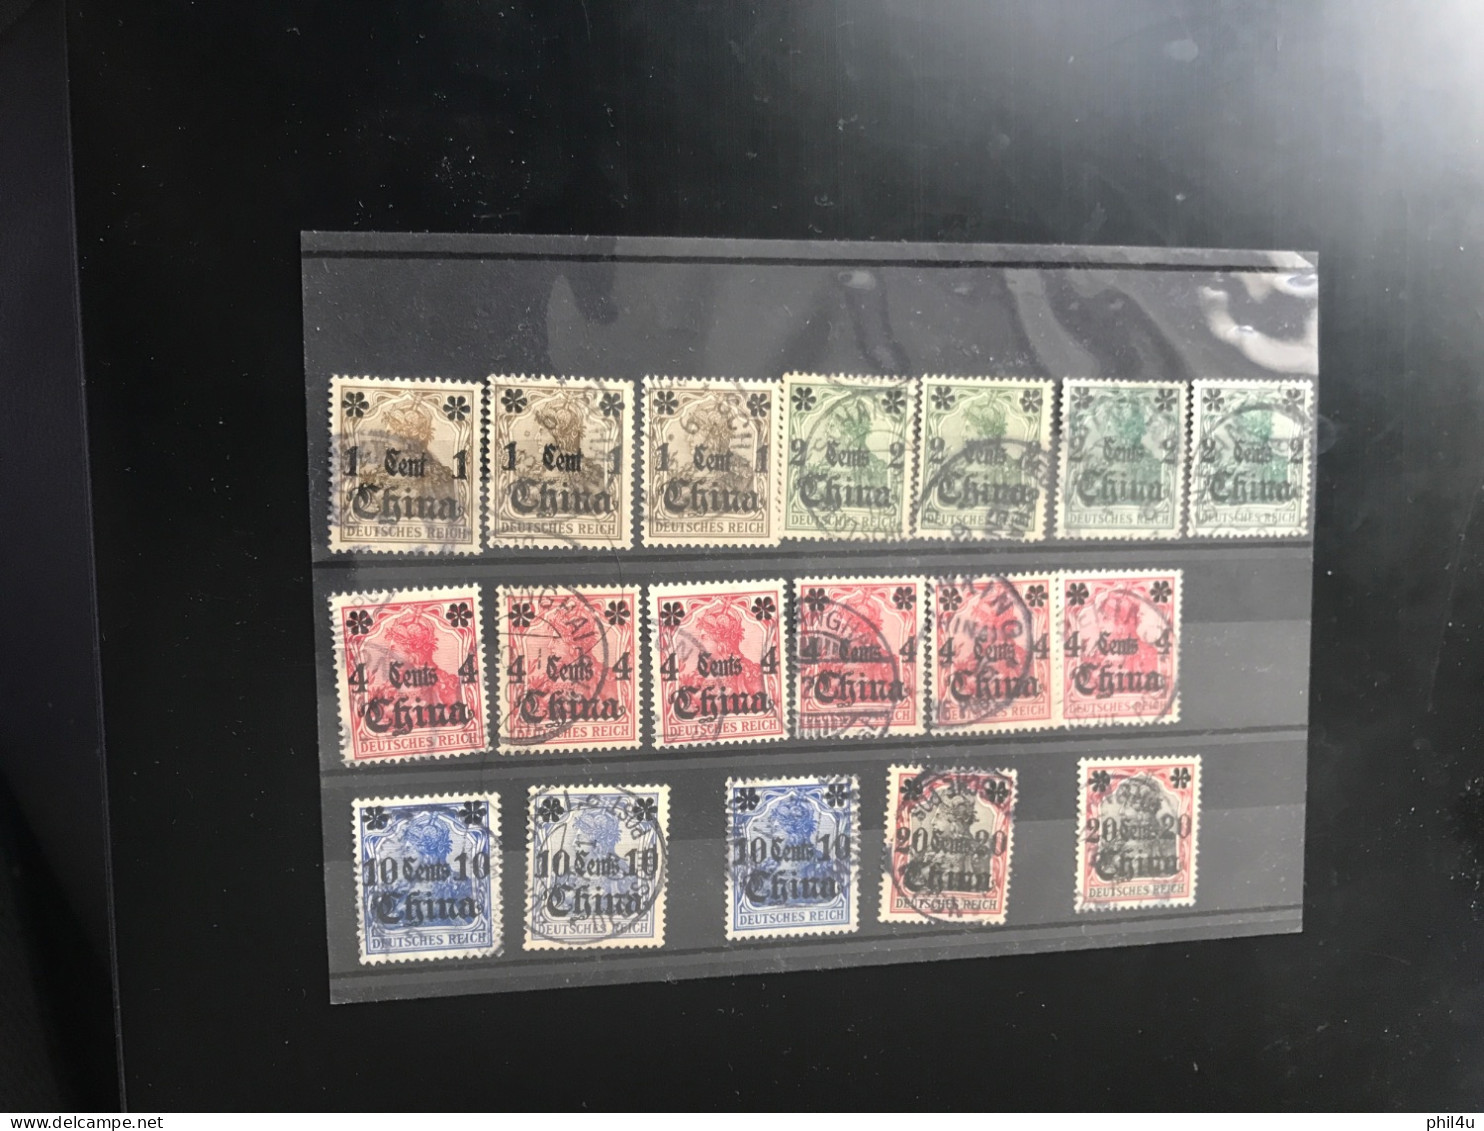 China Overprinted On Deutsch Reich SG1c,2c,4c,10c,20c Cat £66.75 As Per SG2018 £66.75 See Photos - Used Stamps